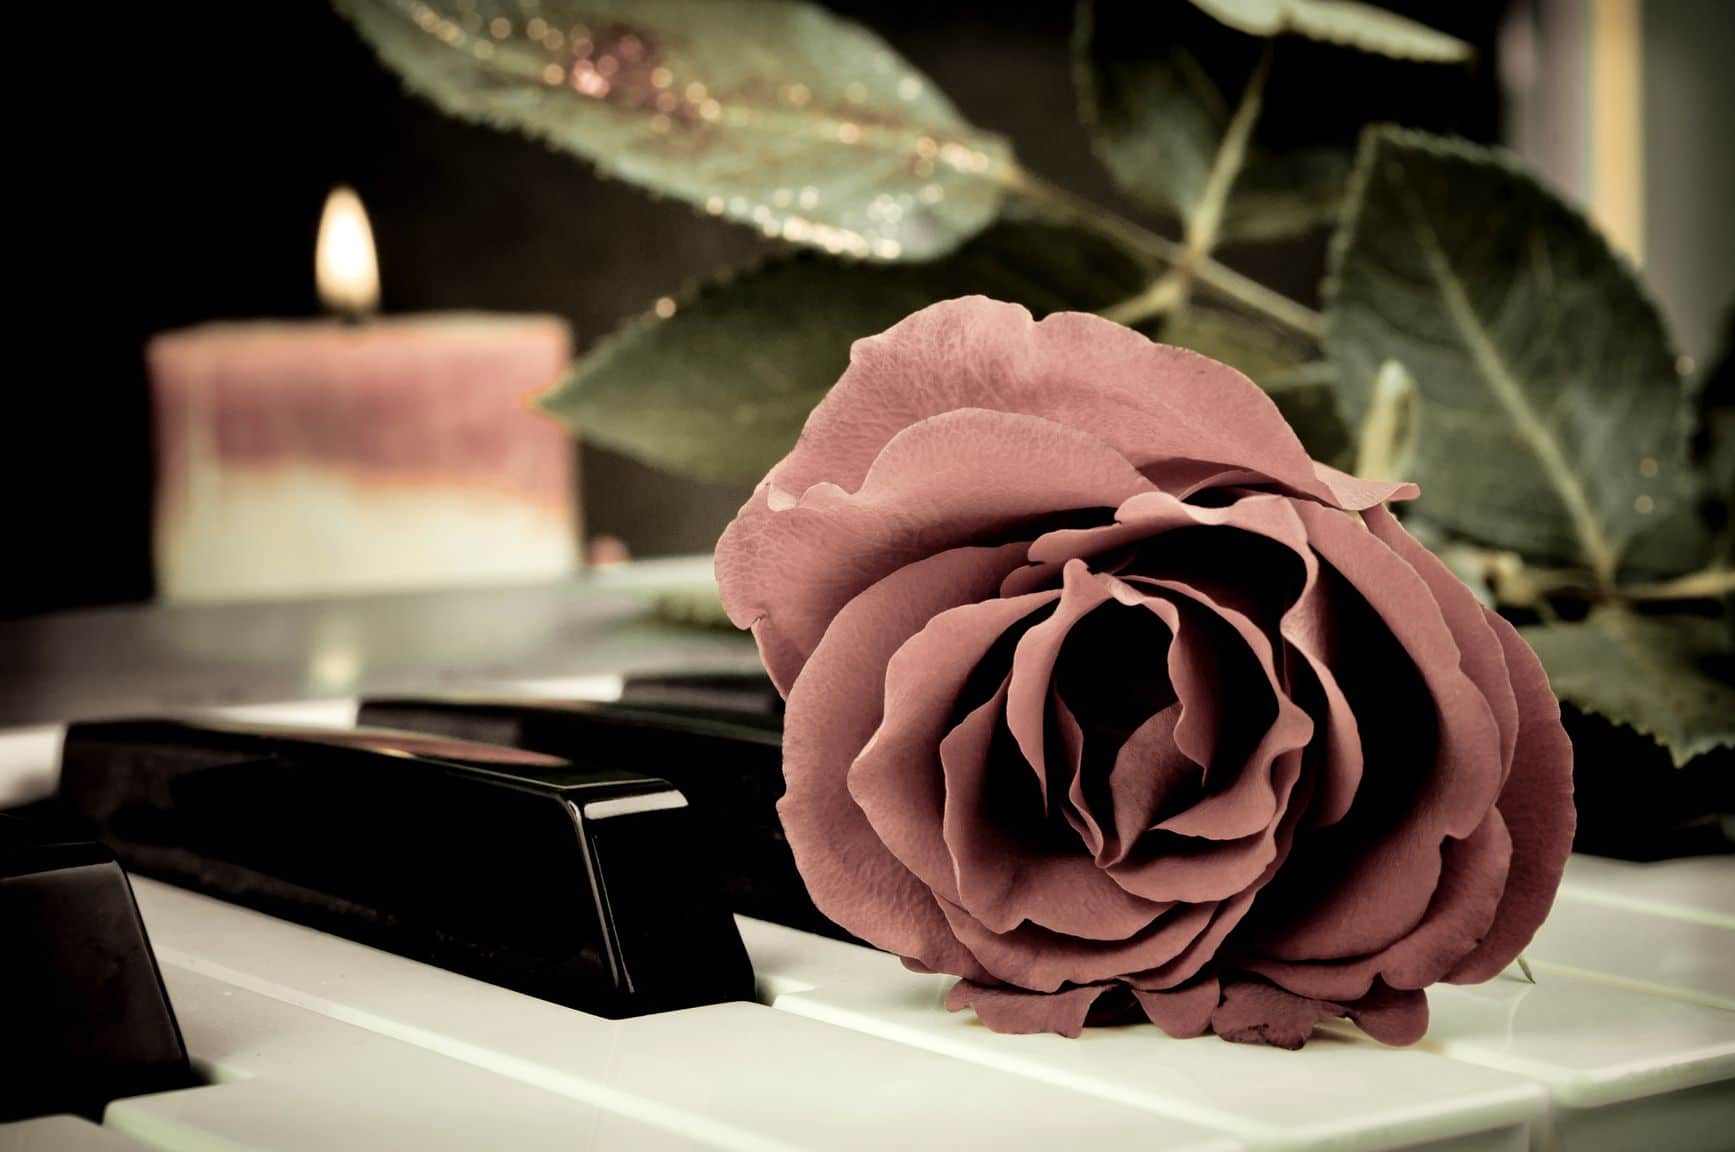 Red rose on the synthesizer keyboard and burning candle in the background